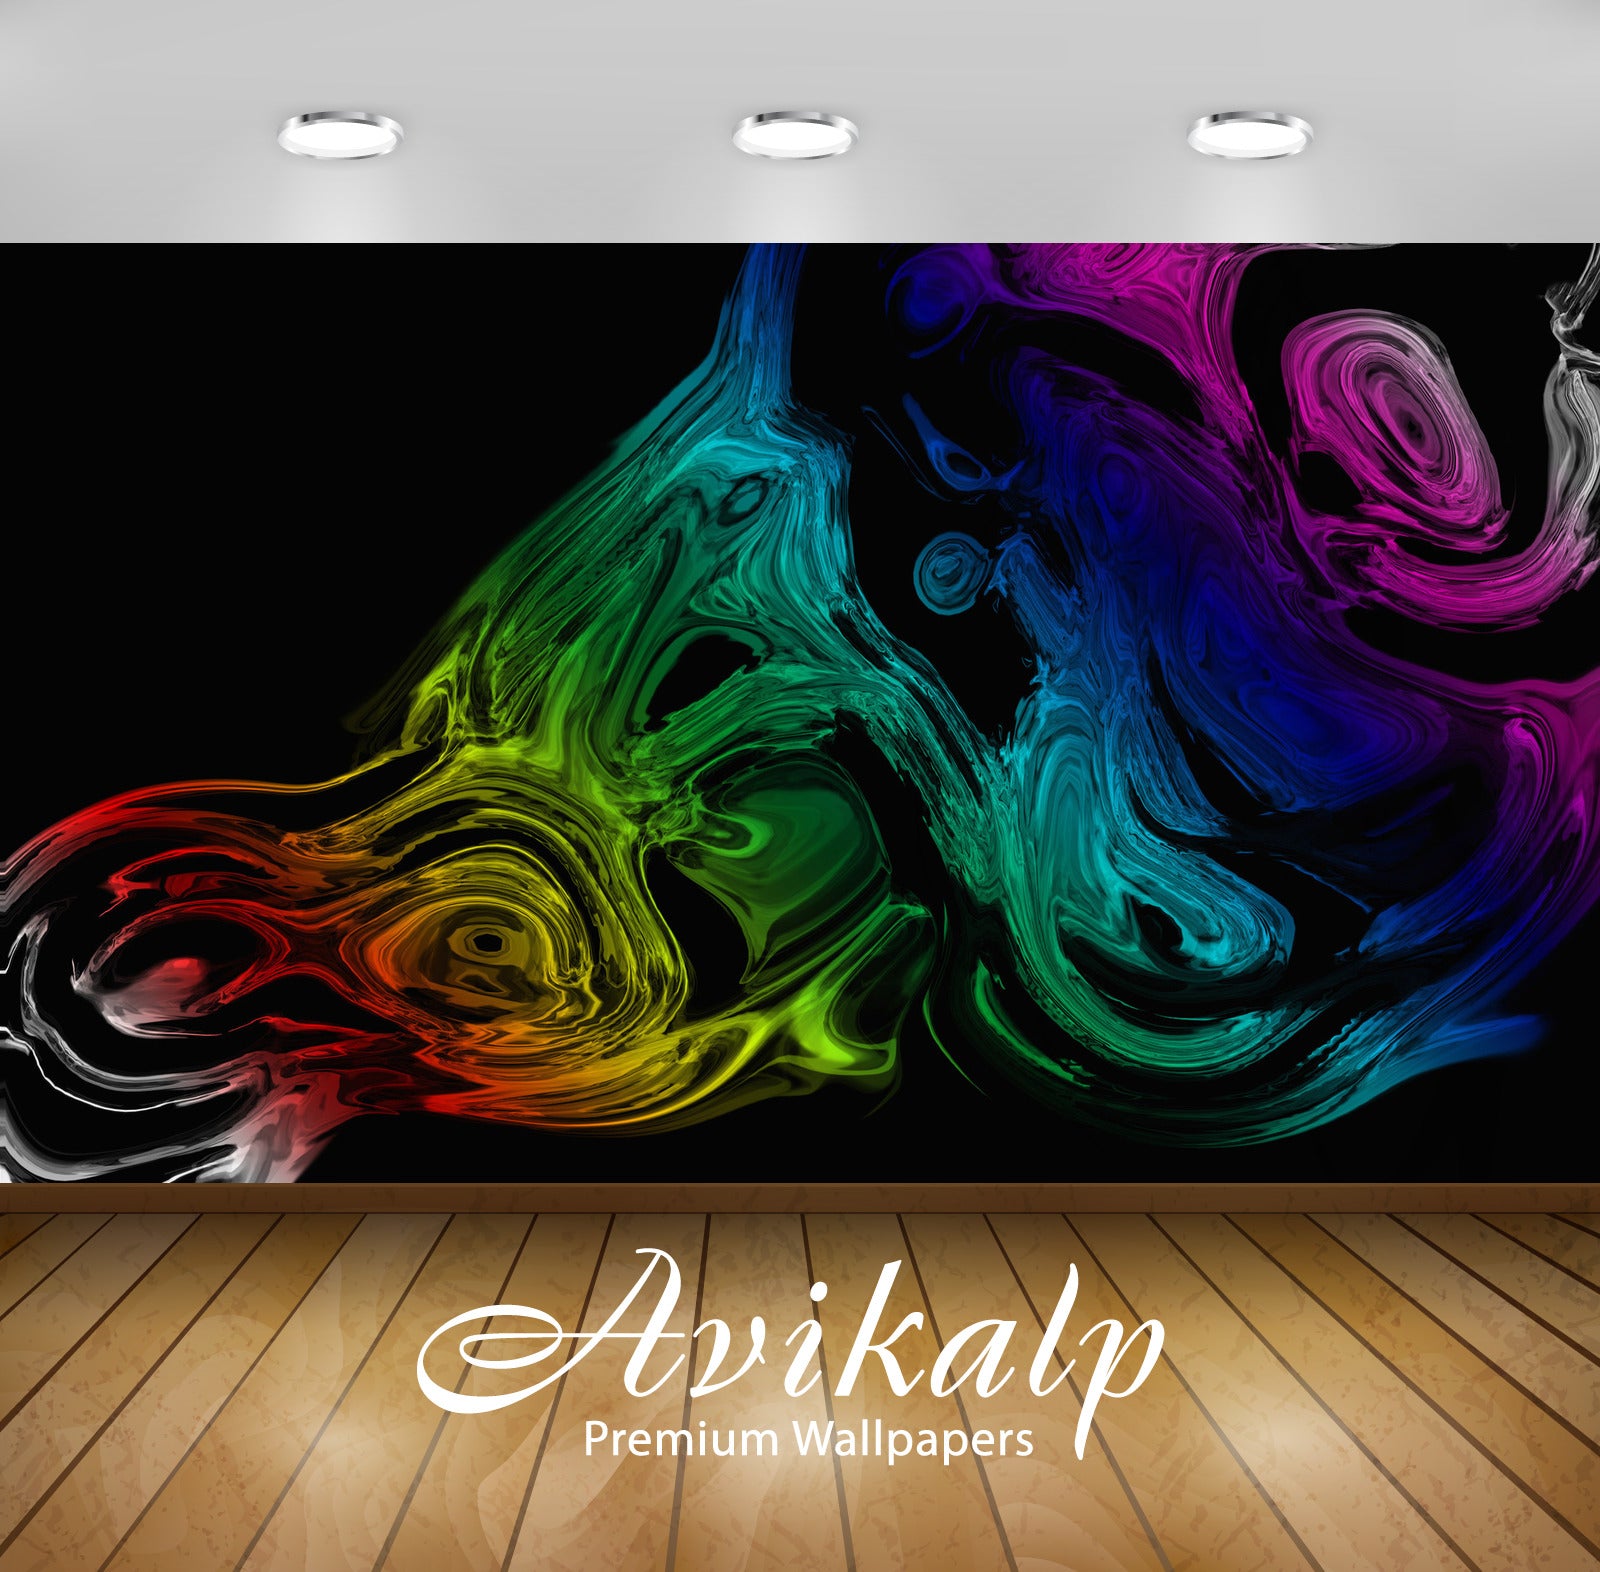 Avikalp Exclusive Awi4588 Rainbow Liquid Full HD Wallpapers for Living room, Hall, Kids Room, Kitche